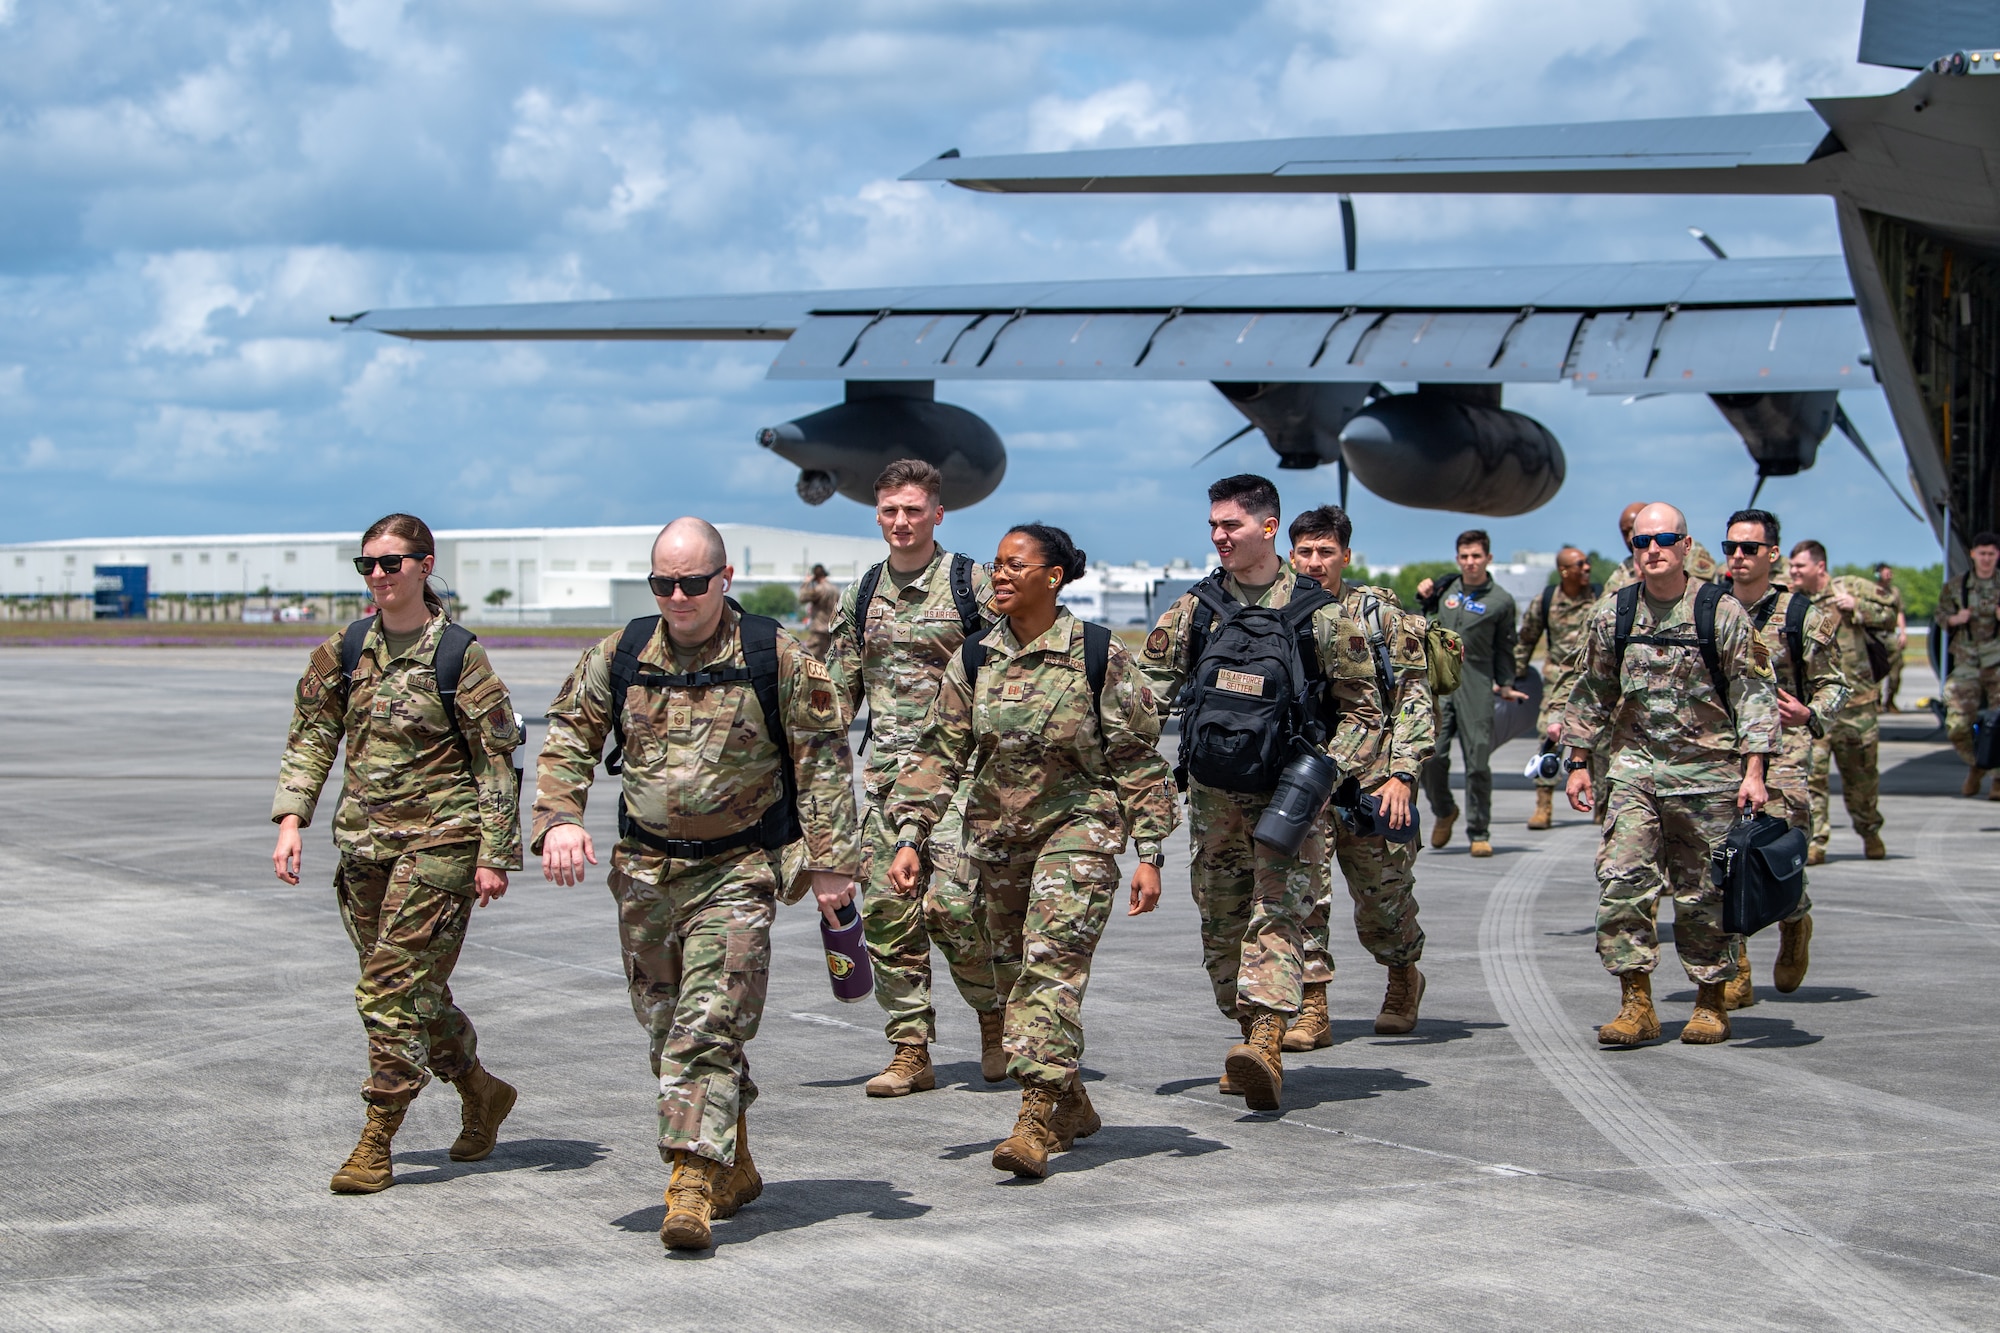 U.S. Air Force Airmen assigned to the 23rd Wing arrive at the main operating base for Exercise Ready Tiger 24-1 at Savannah Air National Guard Base, Georgia, April 10, 2024. During Ready Tiger 24-1, the 23rd Wing will be evaluated on the integration of Air Force Force Generation principles such as Agile Combat Employment, integrated combat turns, forward aerial refueling points, multi-capable Airmen, and combat search and rescue capabilities. (U.S. Air Force photo by Senior Airman Courtney Sebastianelli)